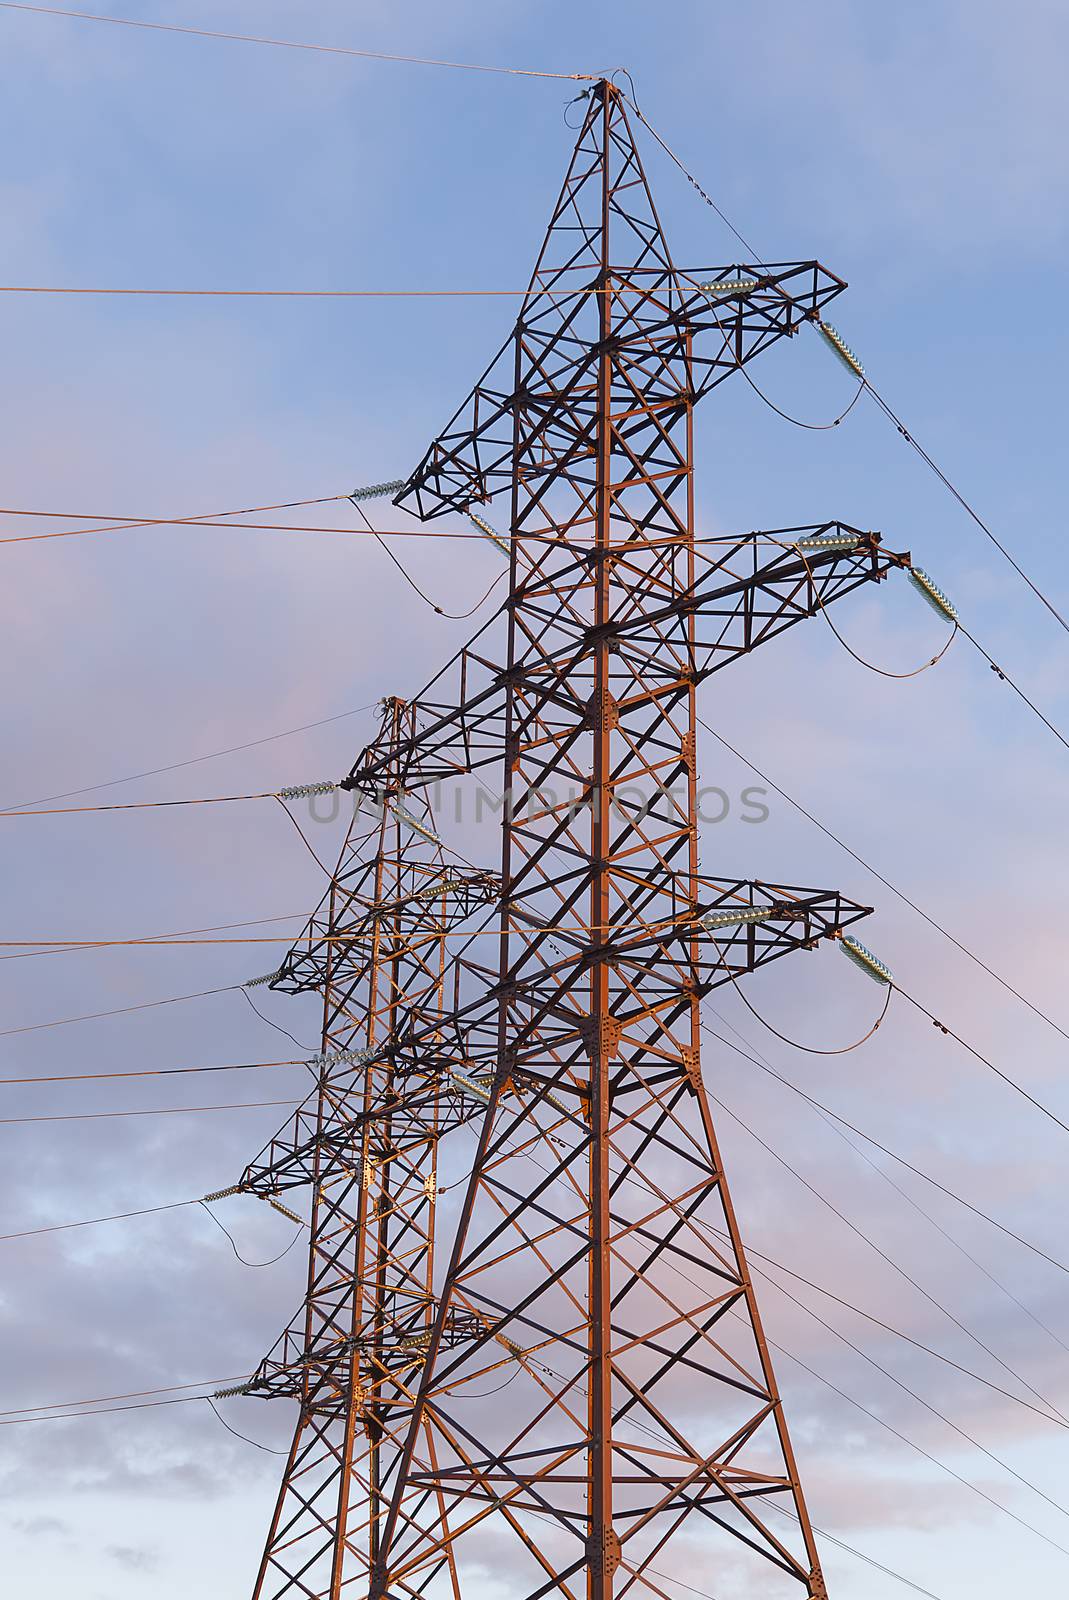 A high-voltage electricity tower. A High-voltage power transmission tower. Power engineering. by PhotoTime